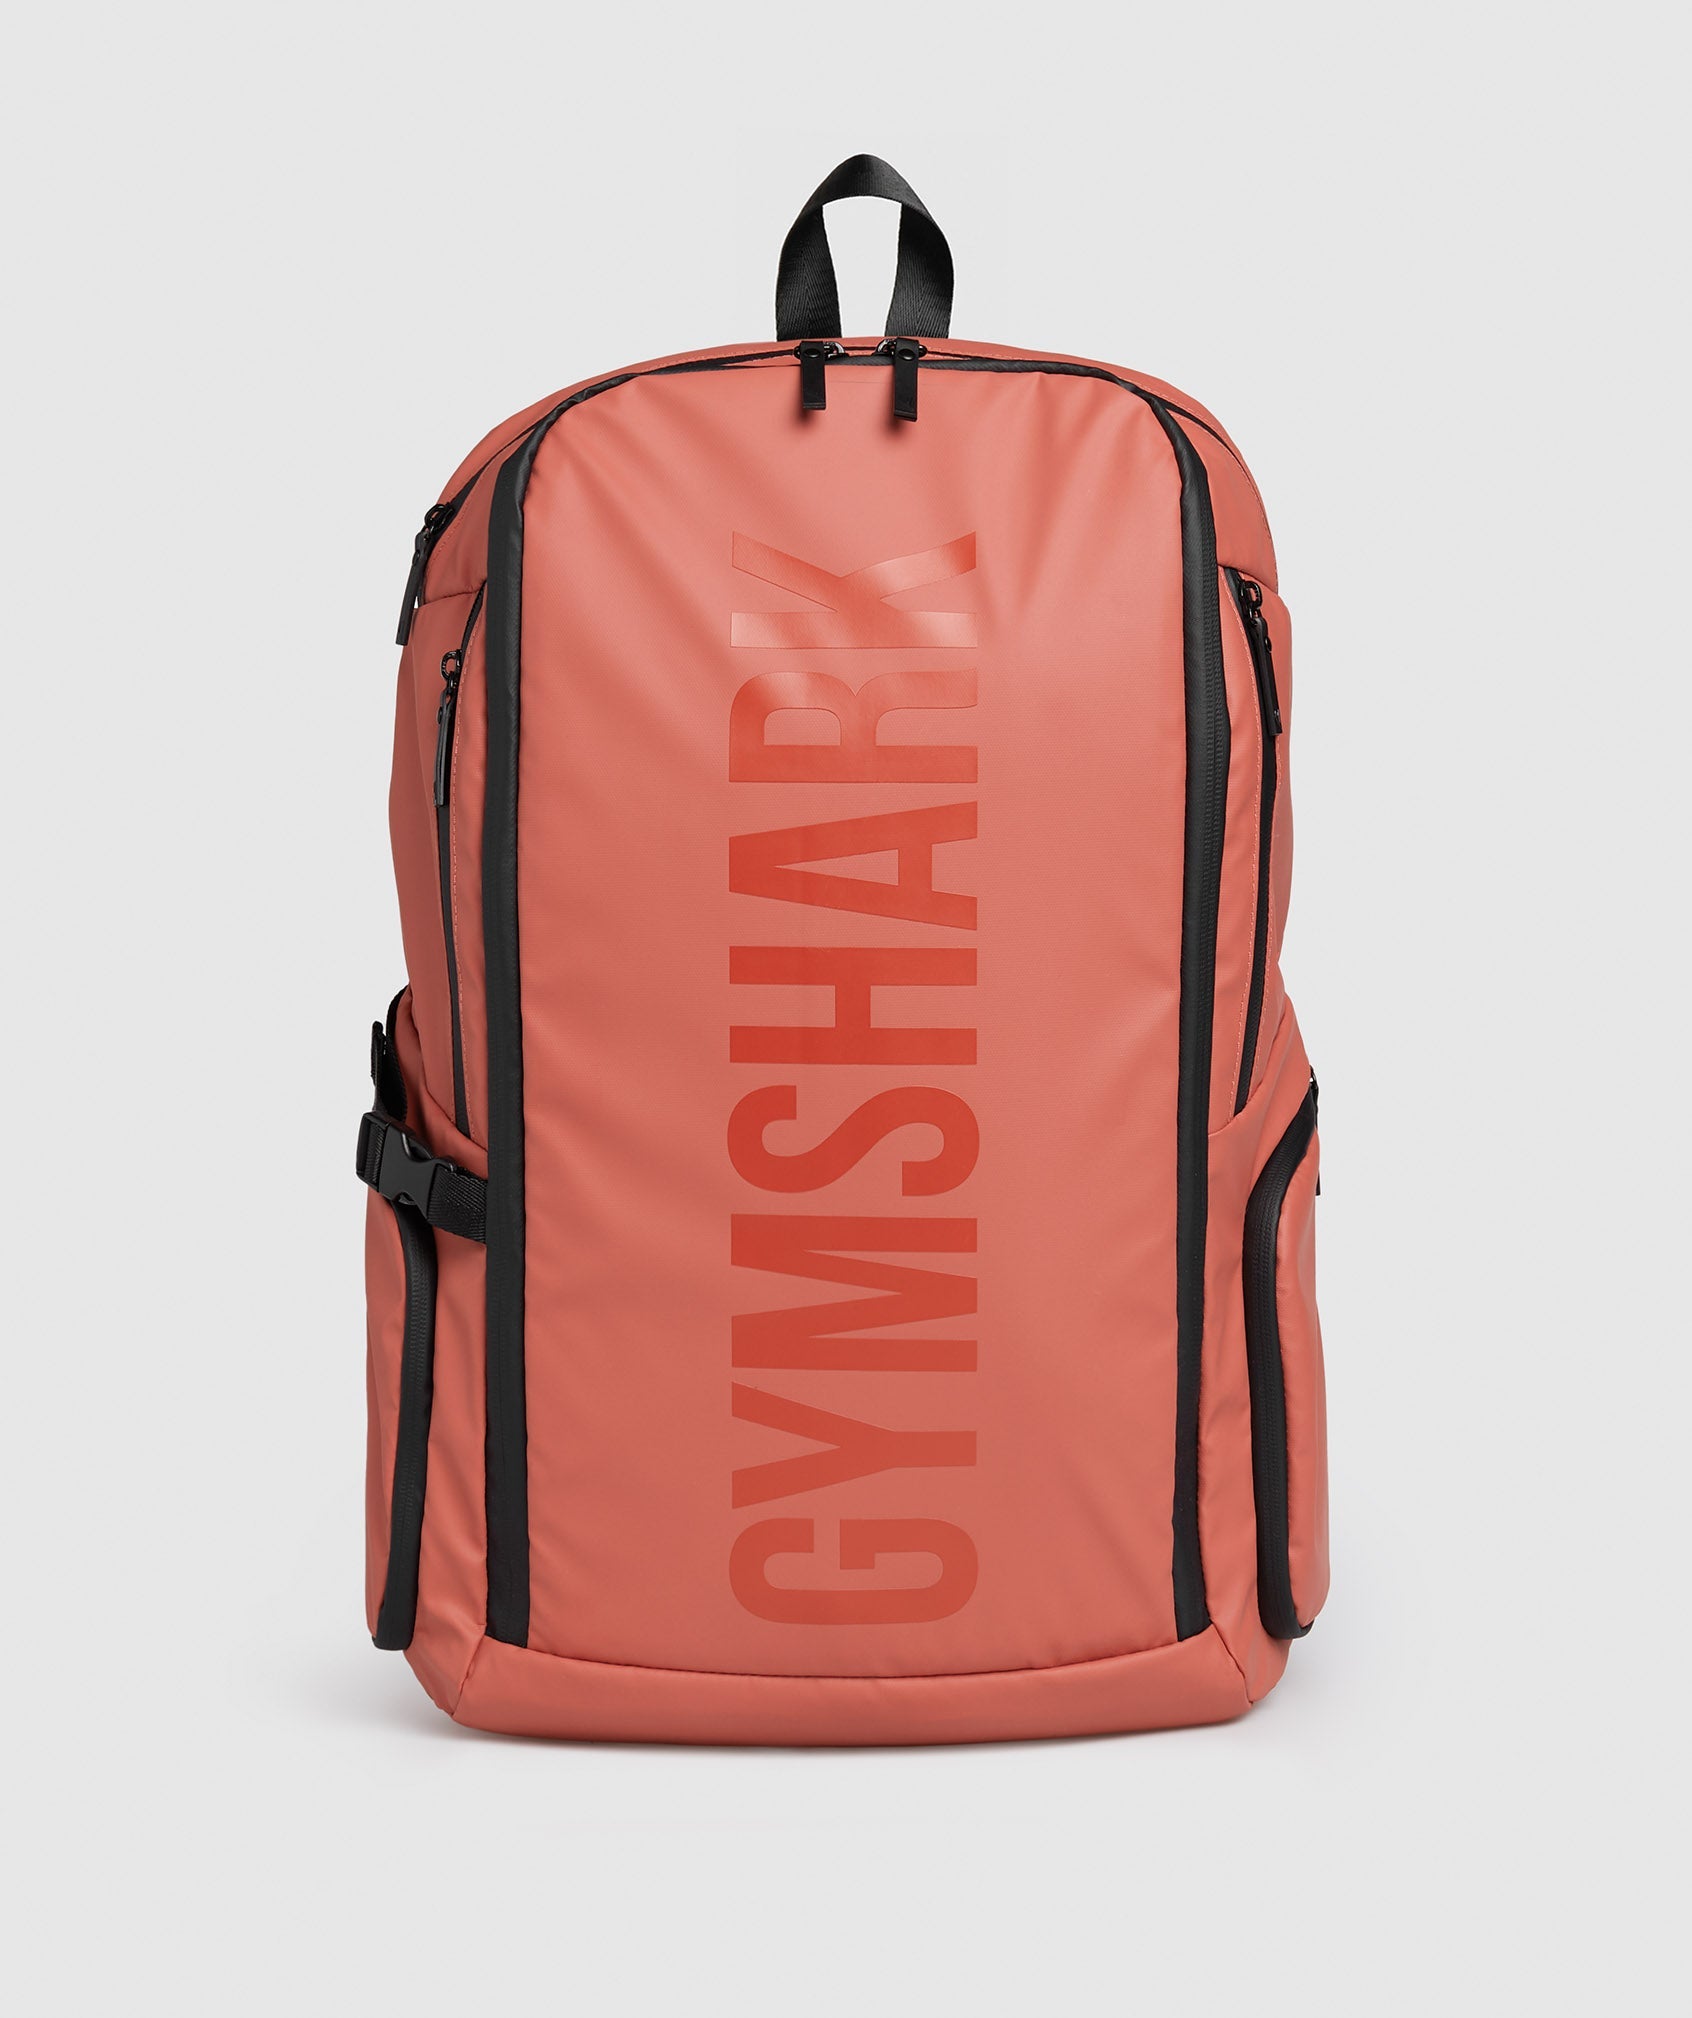 X-Series 0.3 Backpack in Persimmon Red - view 1